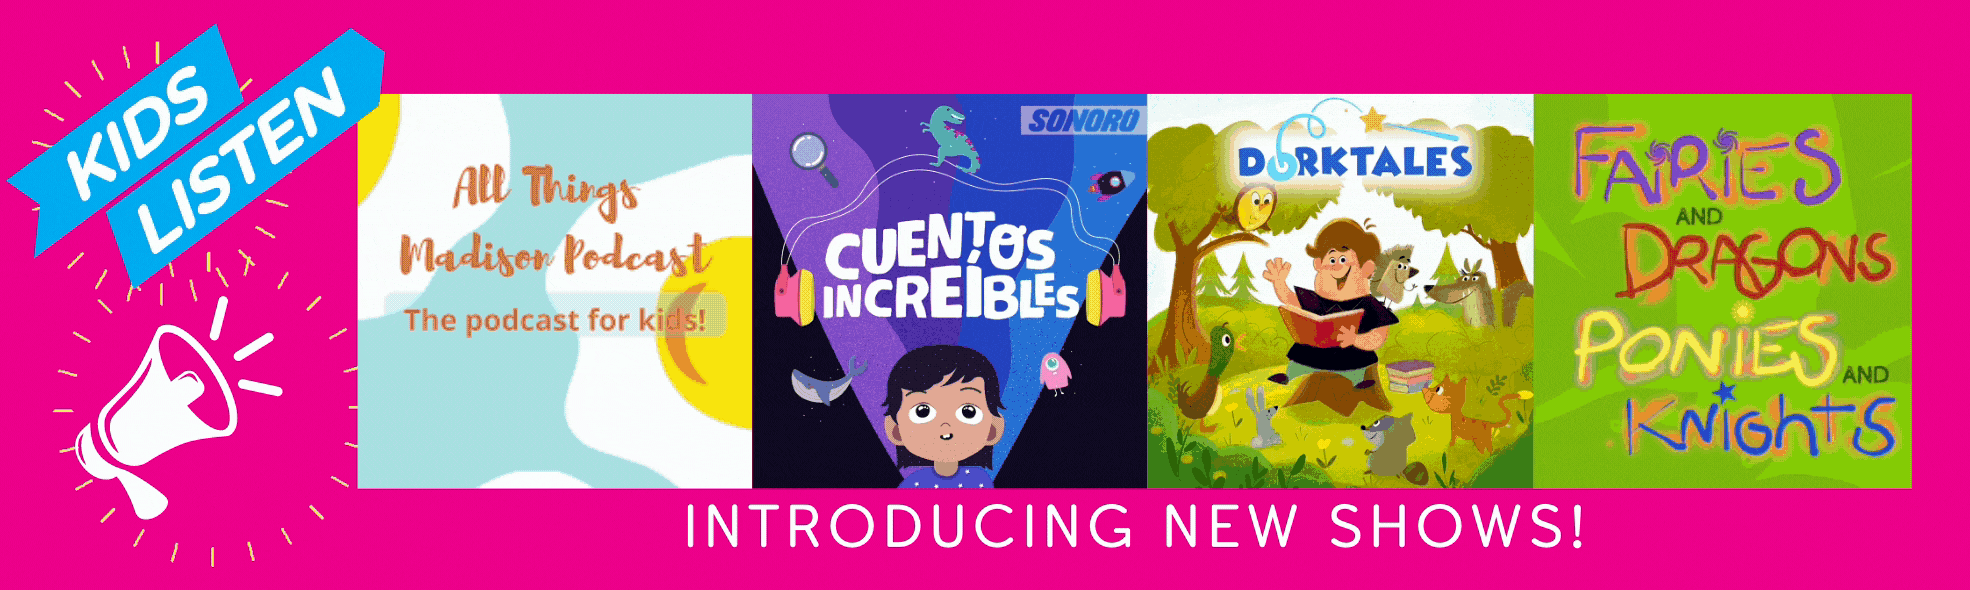 Bright pink BG, Kids Listen banner logo, bullhorn clipart, “introducing new shows,” and image tiles for new shows list below.